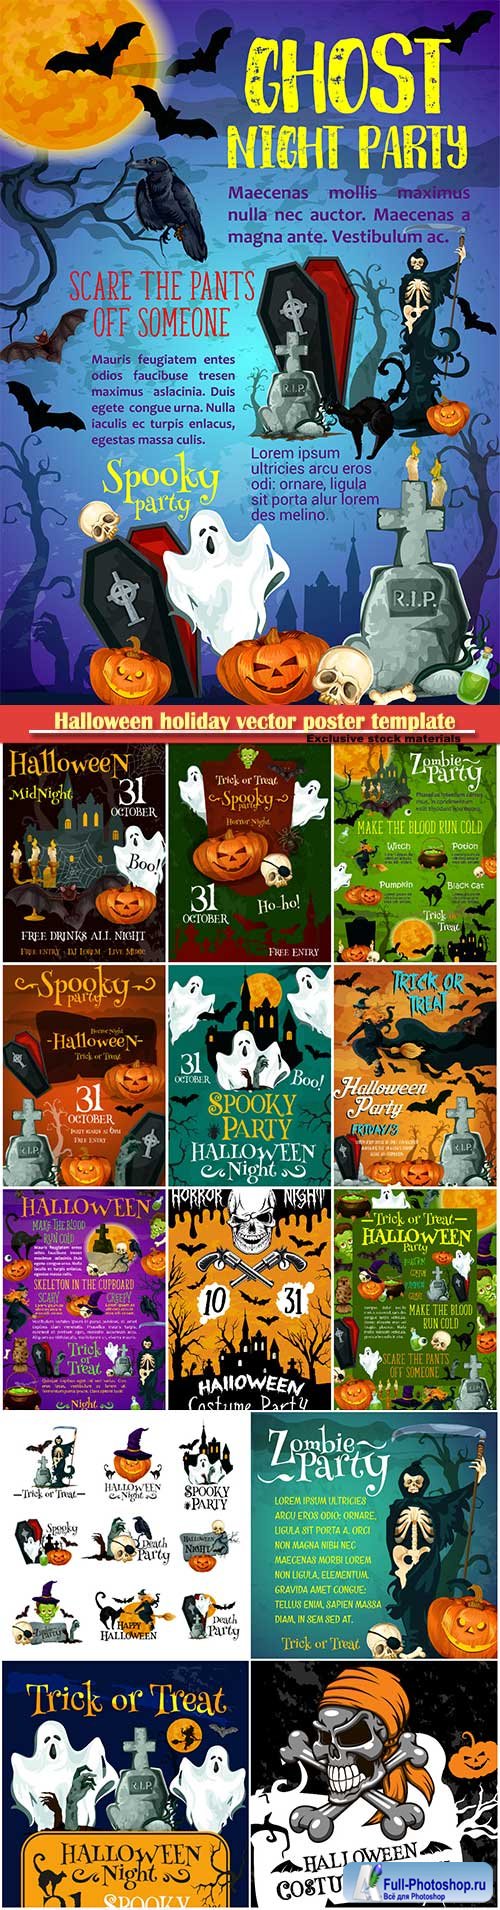 Halloween holiday vector poster template, pumpkin with witch hat, spider and skull, flying bat and ghost, creepy skeleton with scythe, cemetery and zombie